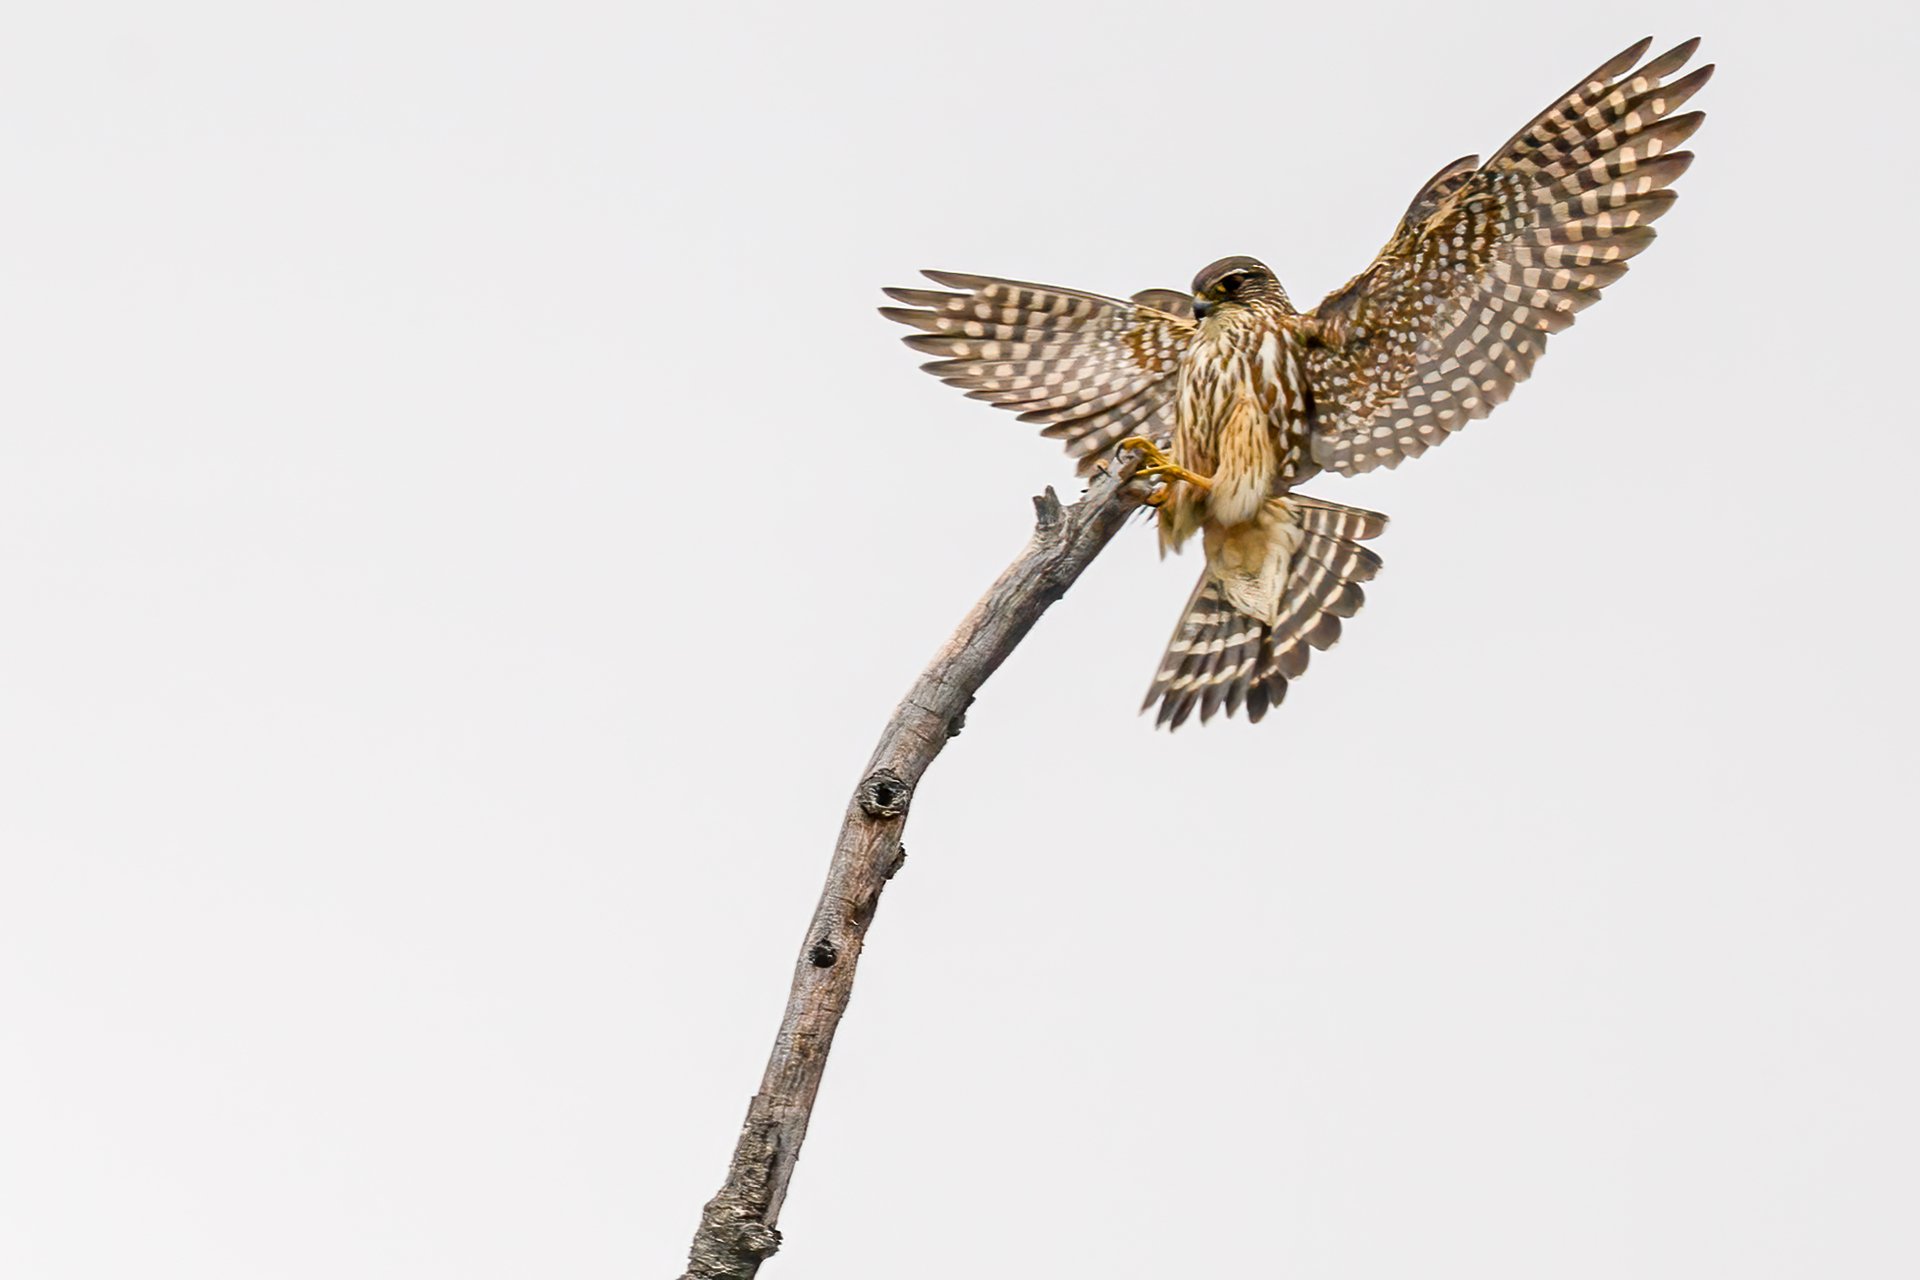 Merlin, wings out-stretched on a branch